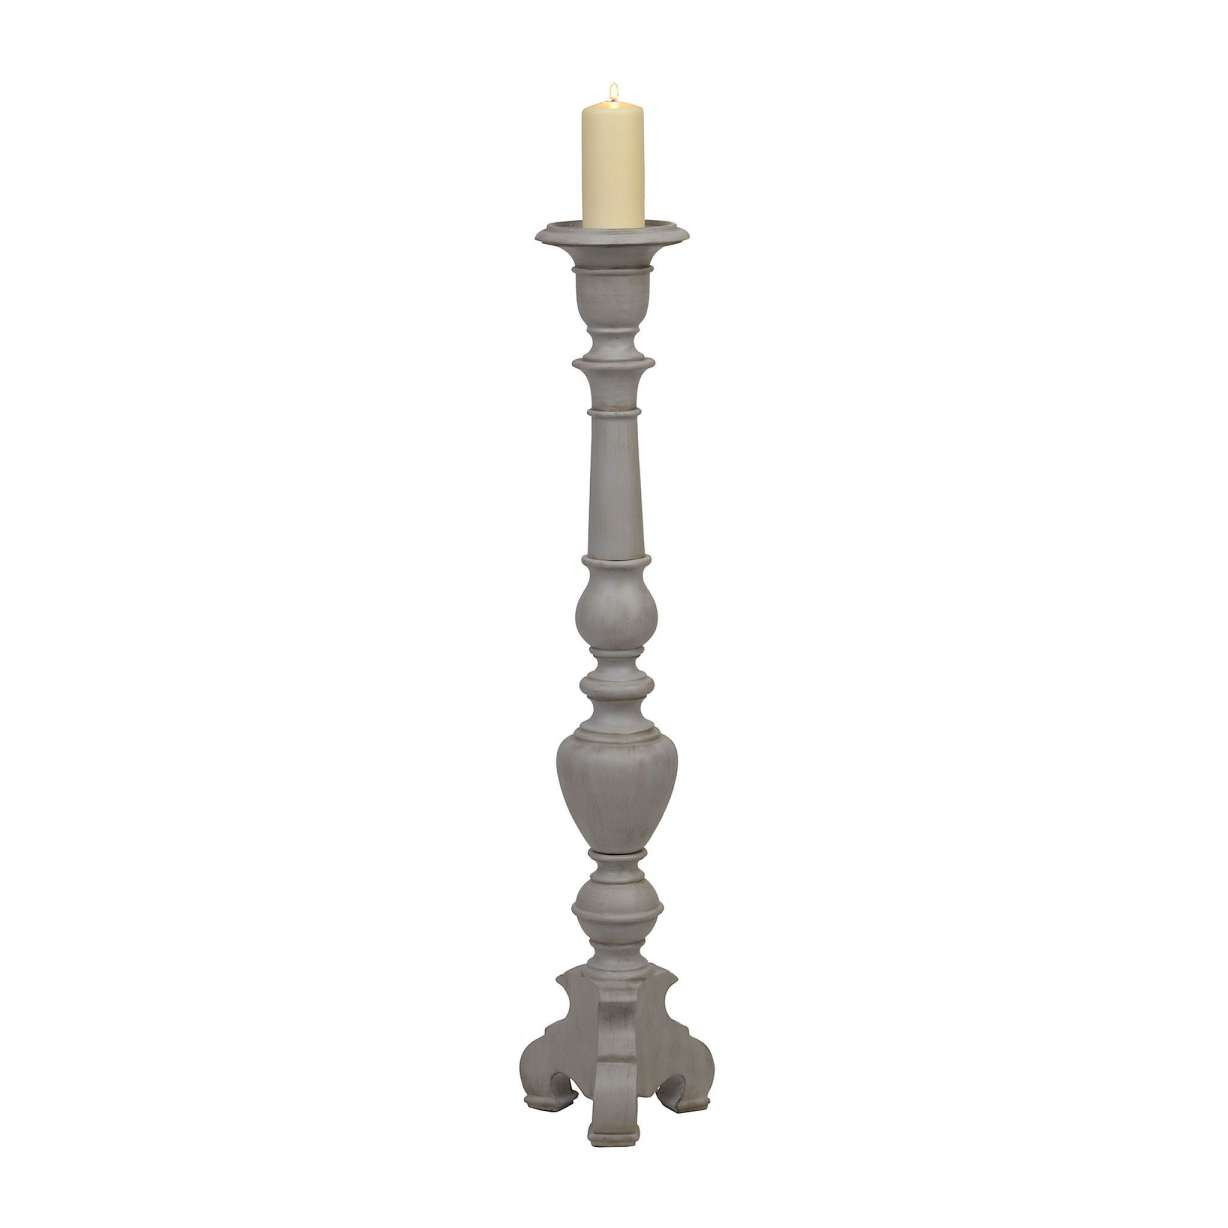 Wholesale Bulk Glass Vases Of Gray Candle Holders Luxury although Gray Floor Candle Holder 42 In Pertaining to Gray Candle Holders Luxury although Gray Floor Candle Holder 42 In